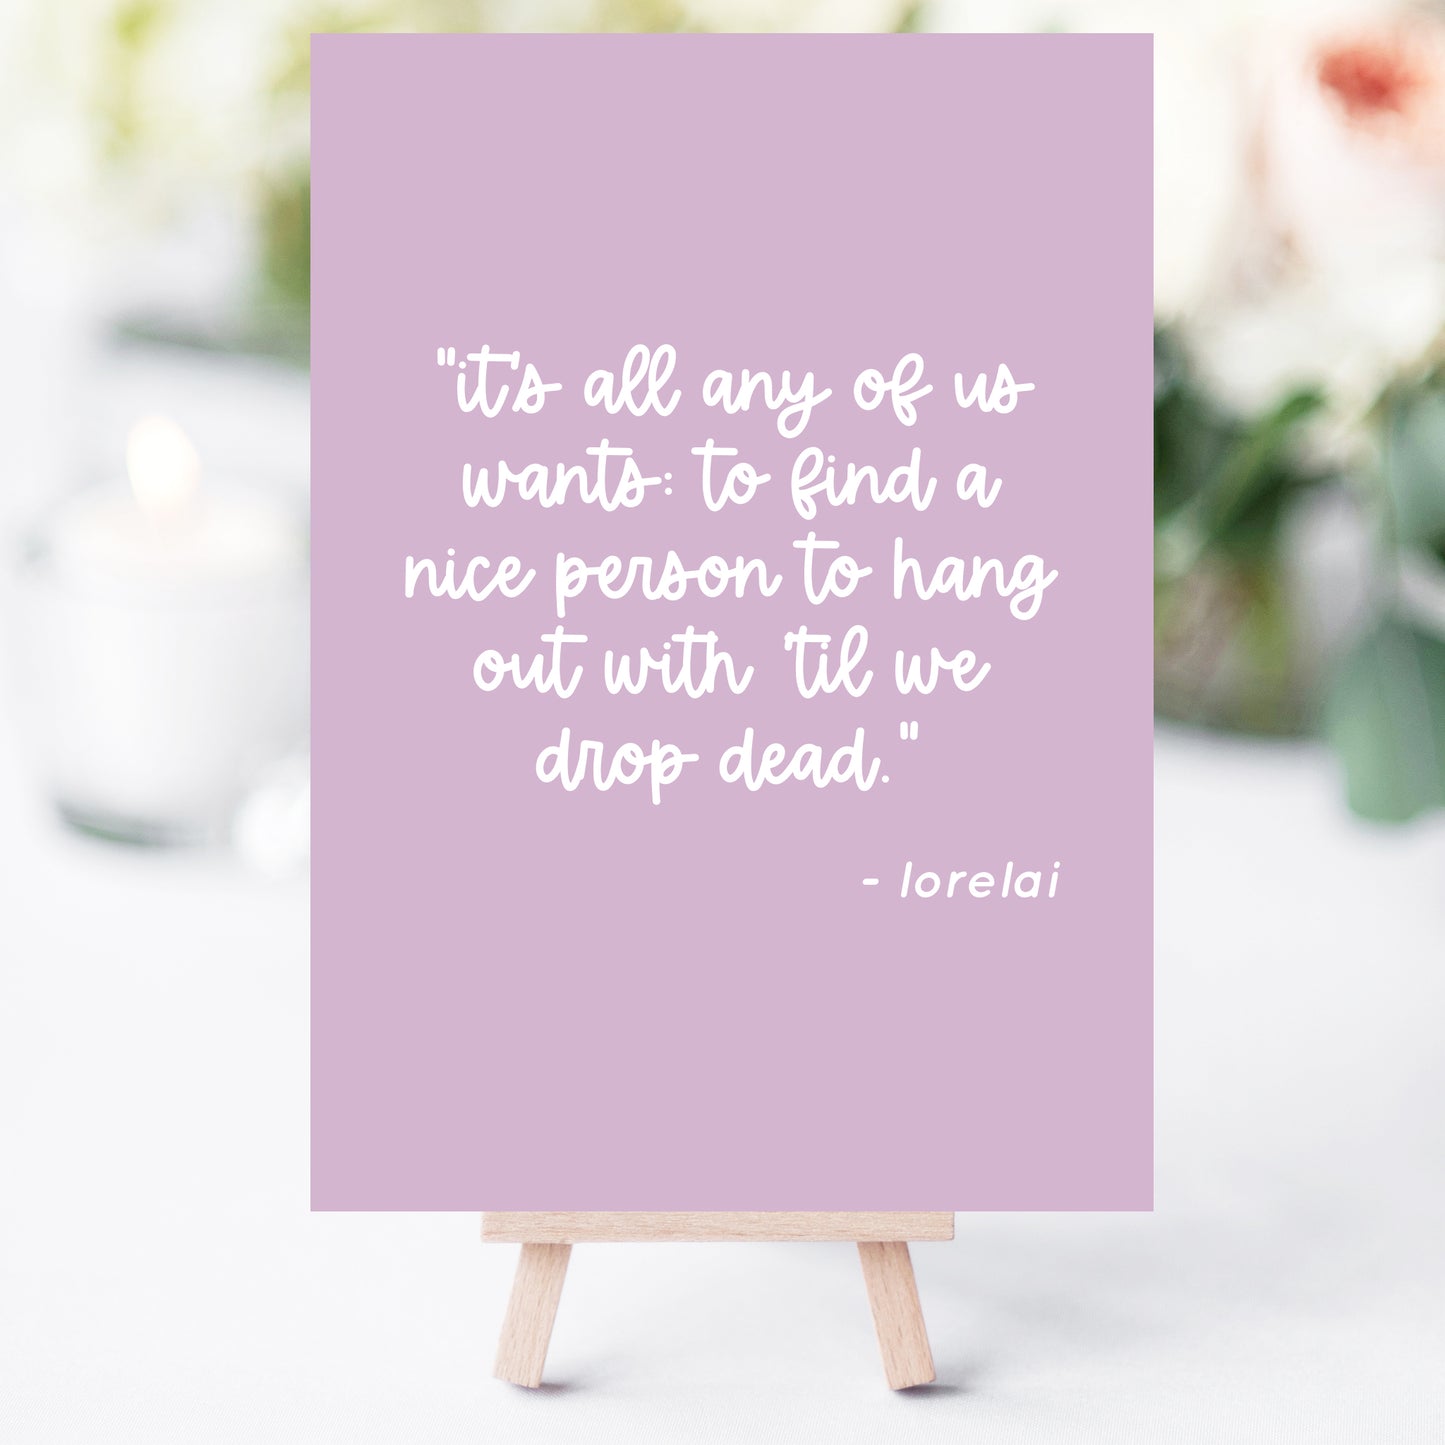 Gilmore Bridal Shower Love Quotes Printables